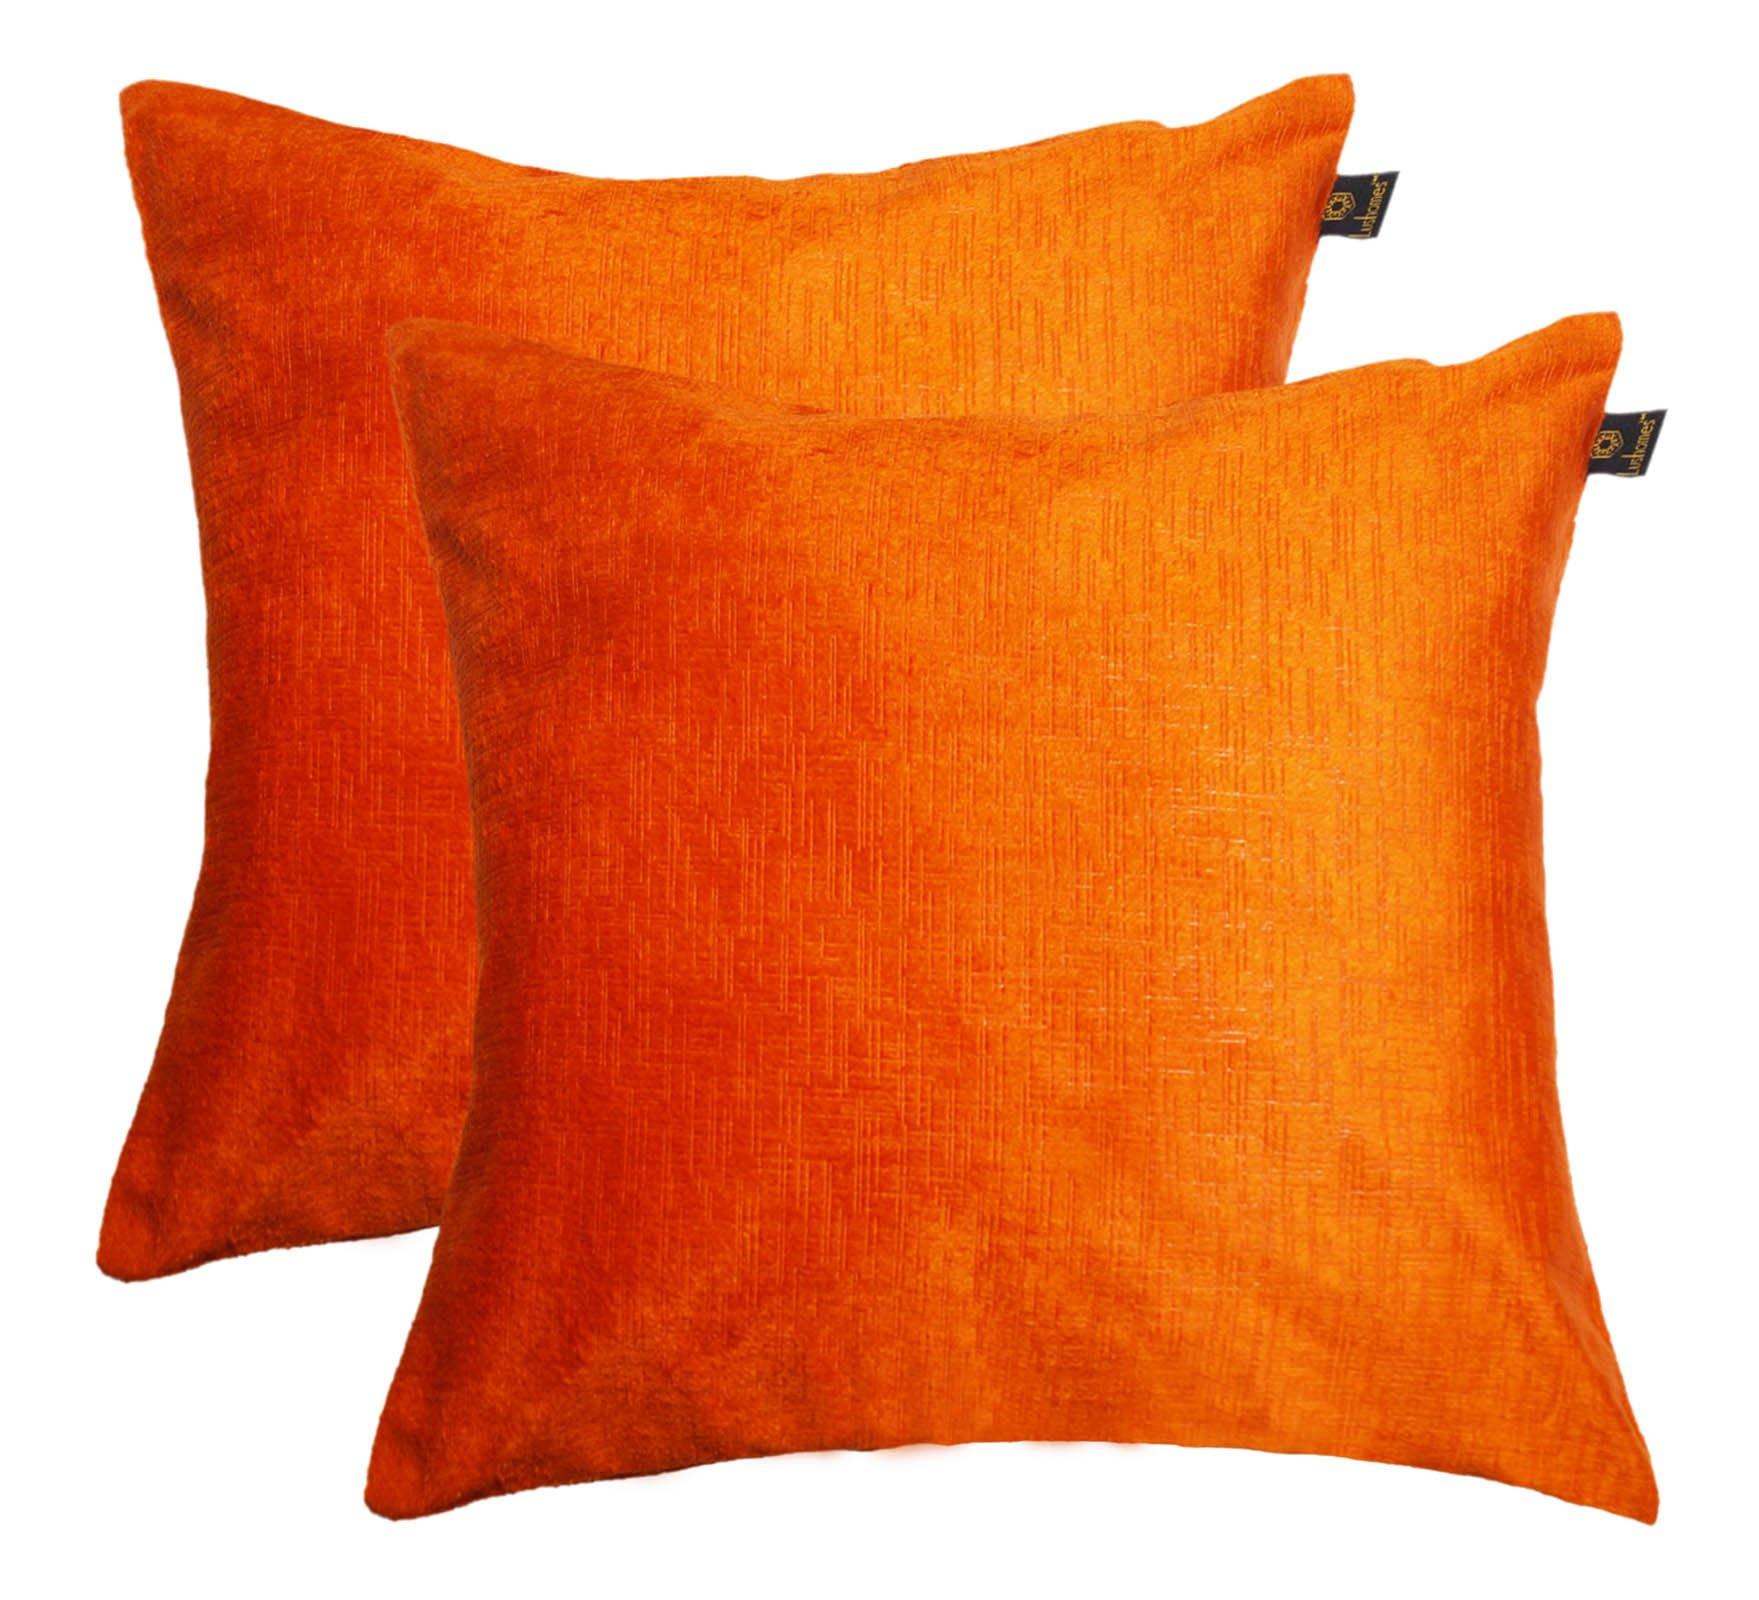 Lushomes Orange Embossed Blackberry Cushion Cover (Pack of 2) - Lushomes